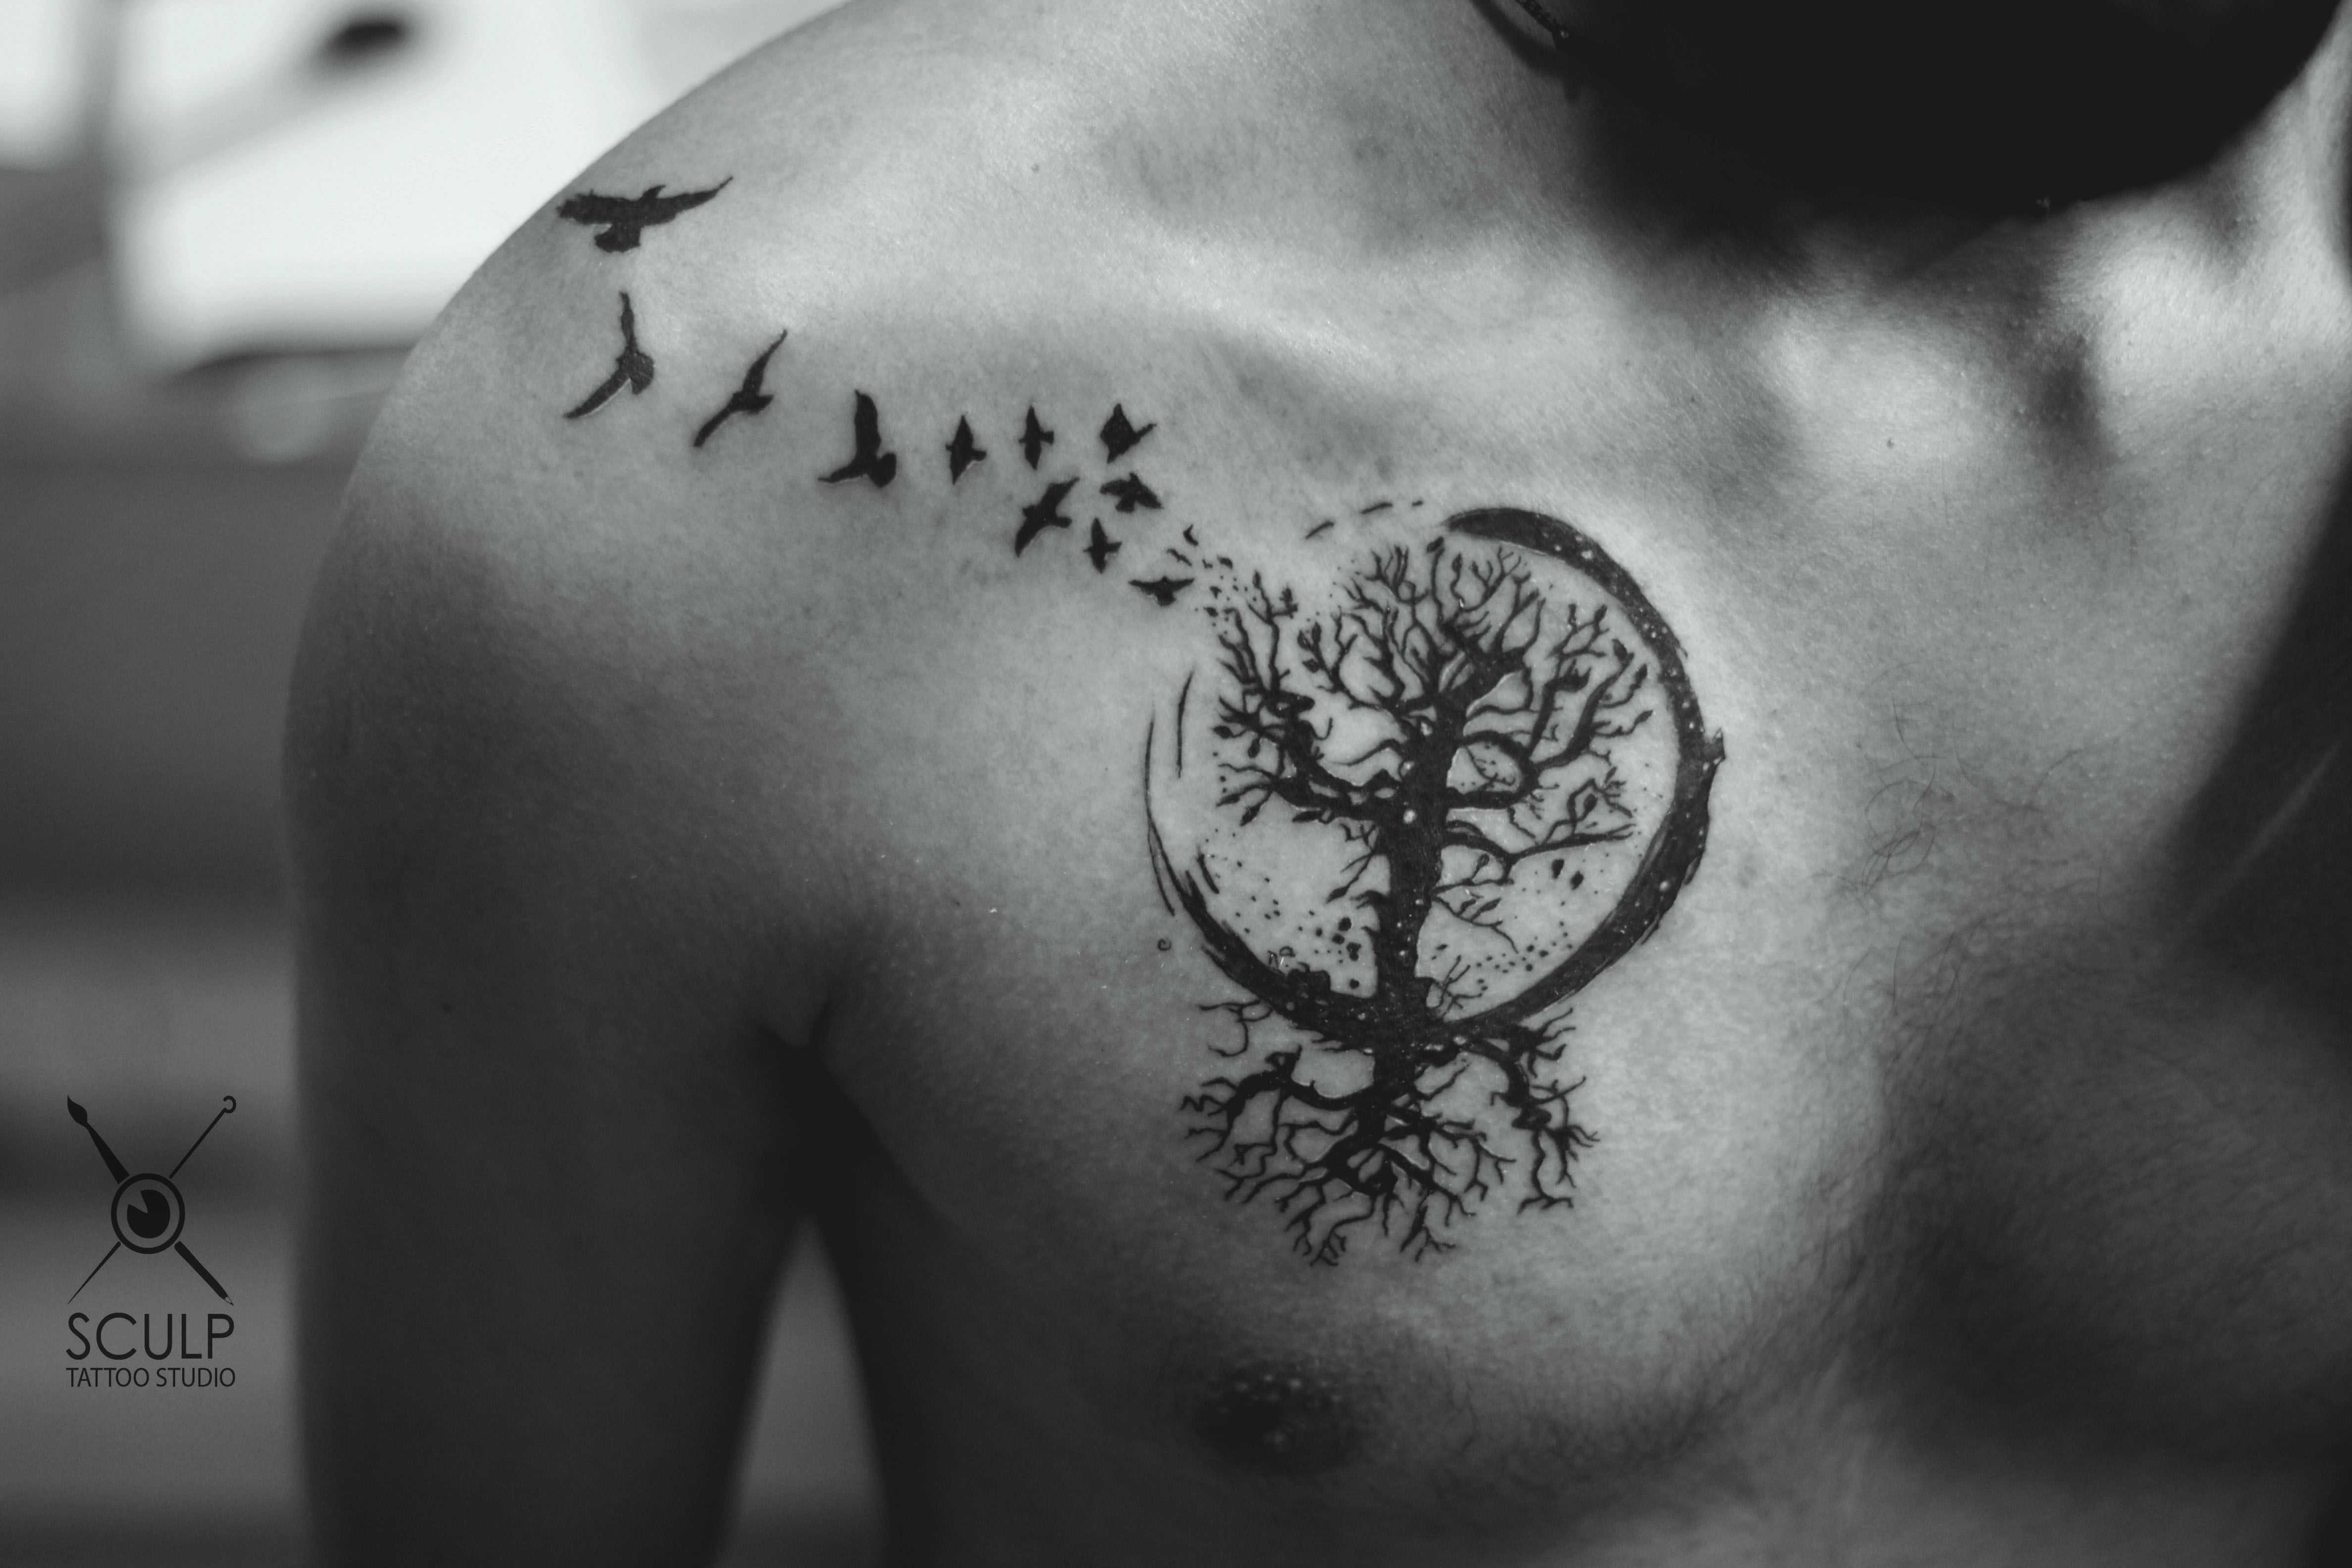 Tree Of Life Tattoos For Men Tattoo Tng Hnh Xm Hnh Xm with sizing 4752 X 3168